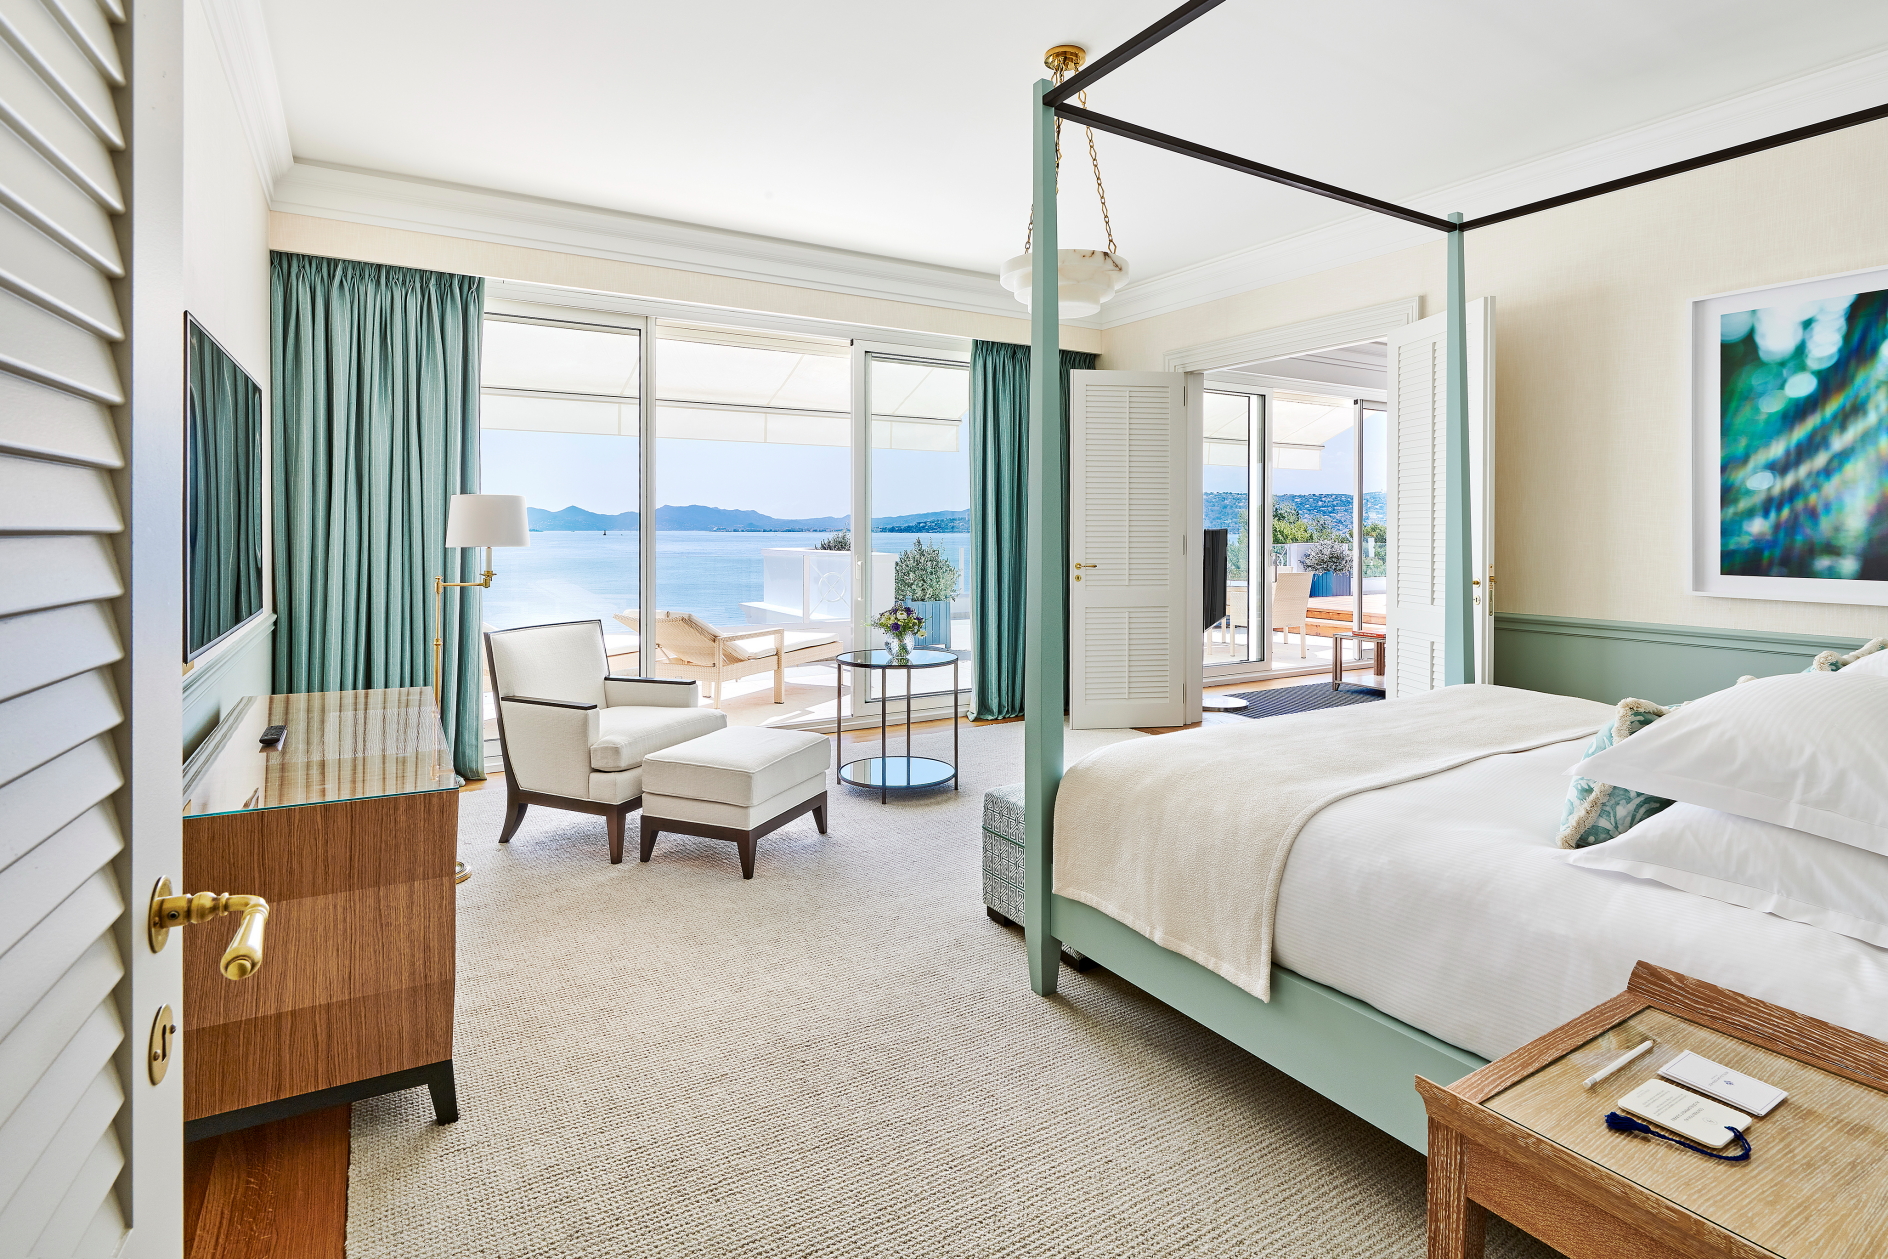 Newly renovated suite at the Hotel du Cap-Eden-Roc. Picture: JMSordello. Click to enlarge.